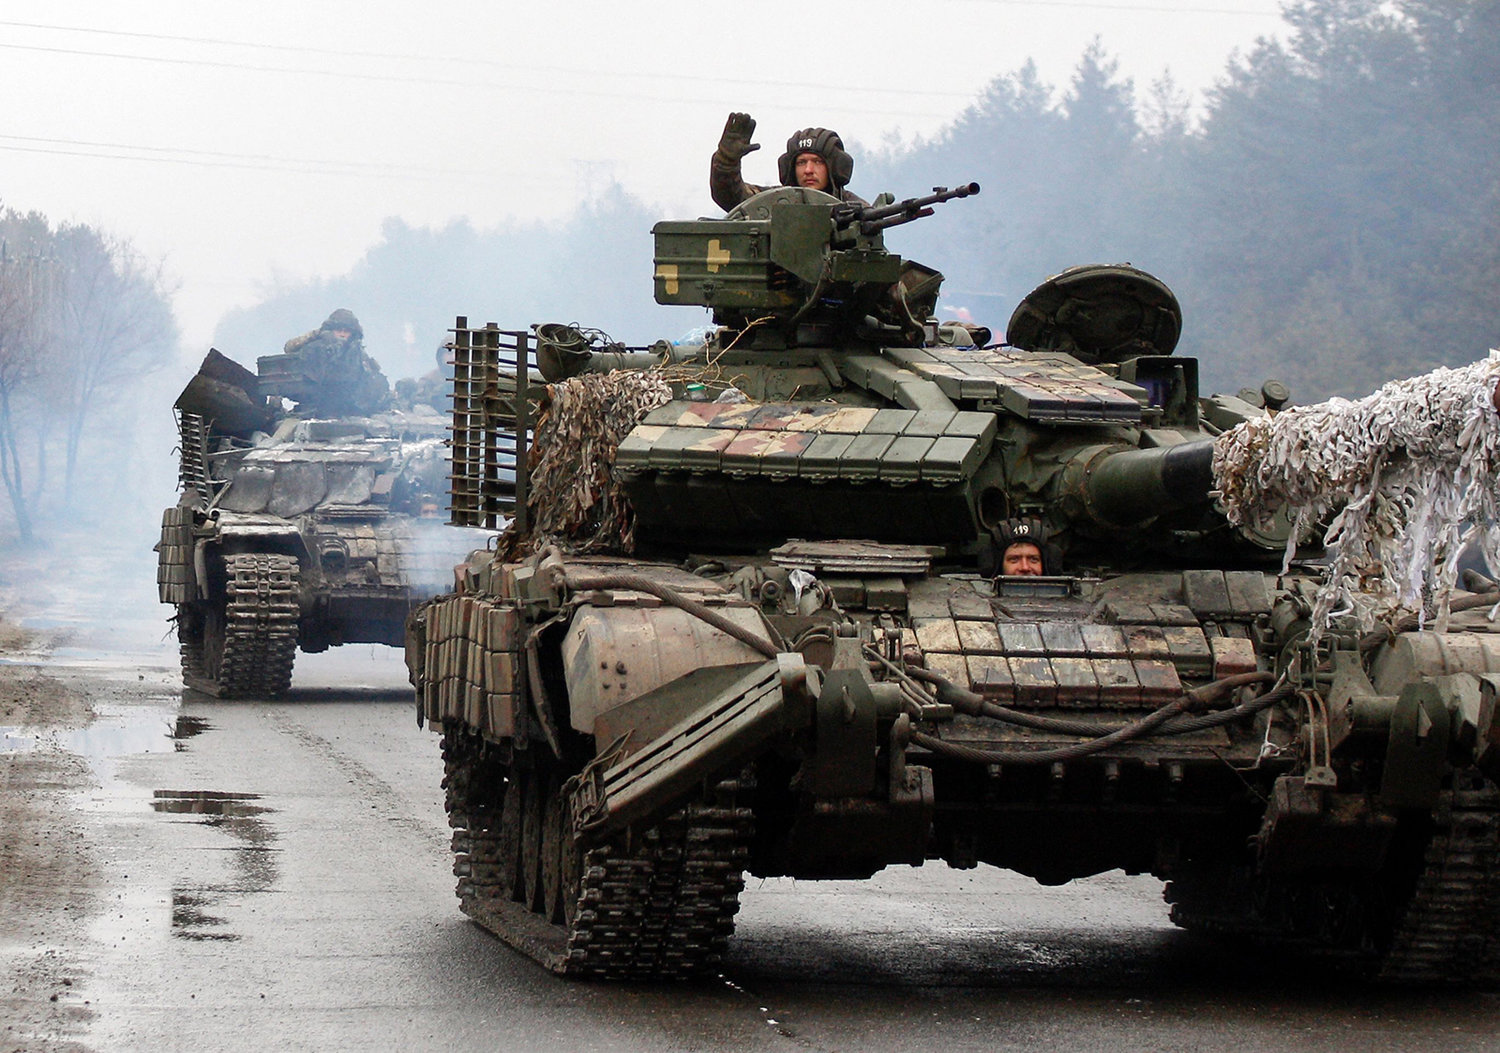 Ukrainian service members ride on tanks toward the front line with Russian forces in the Luhansk region of Ukraine on Feb. 25, 2022. (Anatolii Stepanov/AFP via Getty Images/TNS)